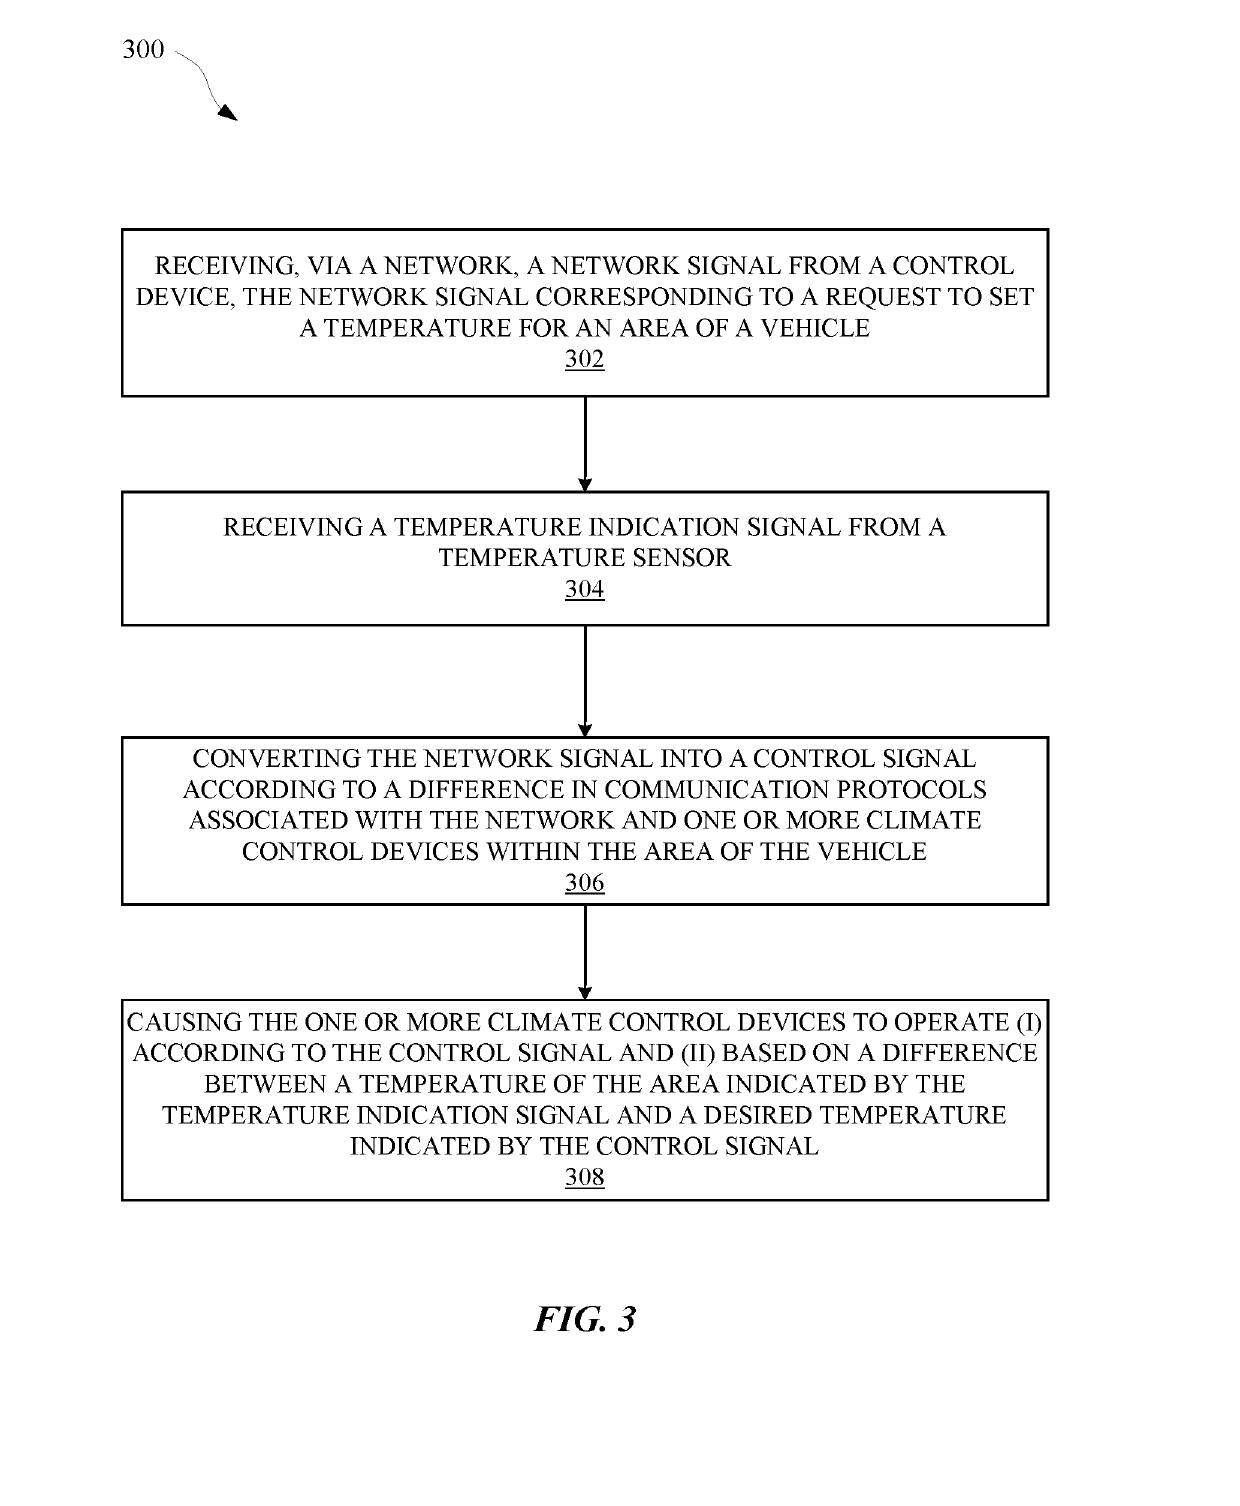 Systems, Methods, and Apparatuses for Providing Communications Between Climate Control Devices in a Recreational Vehicle